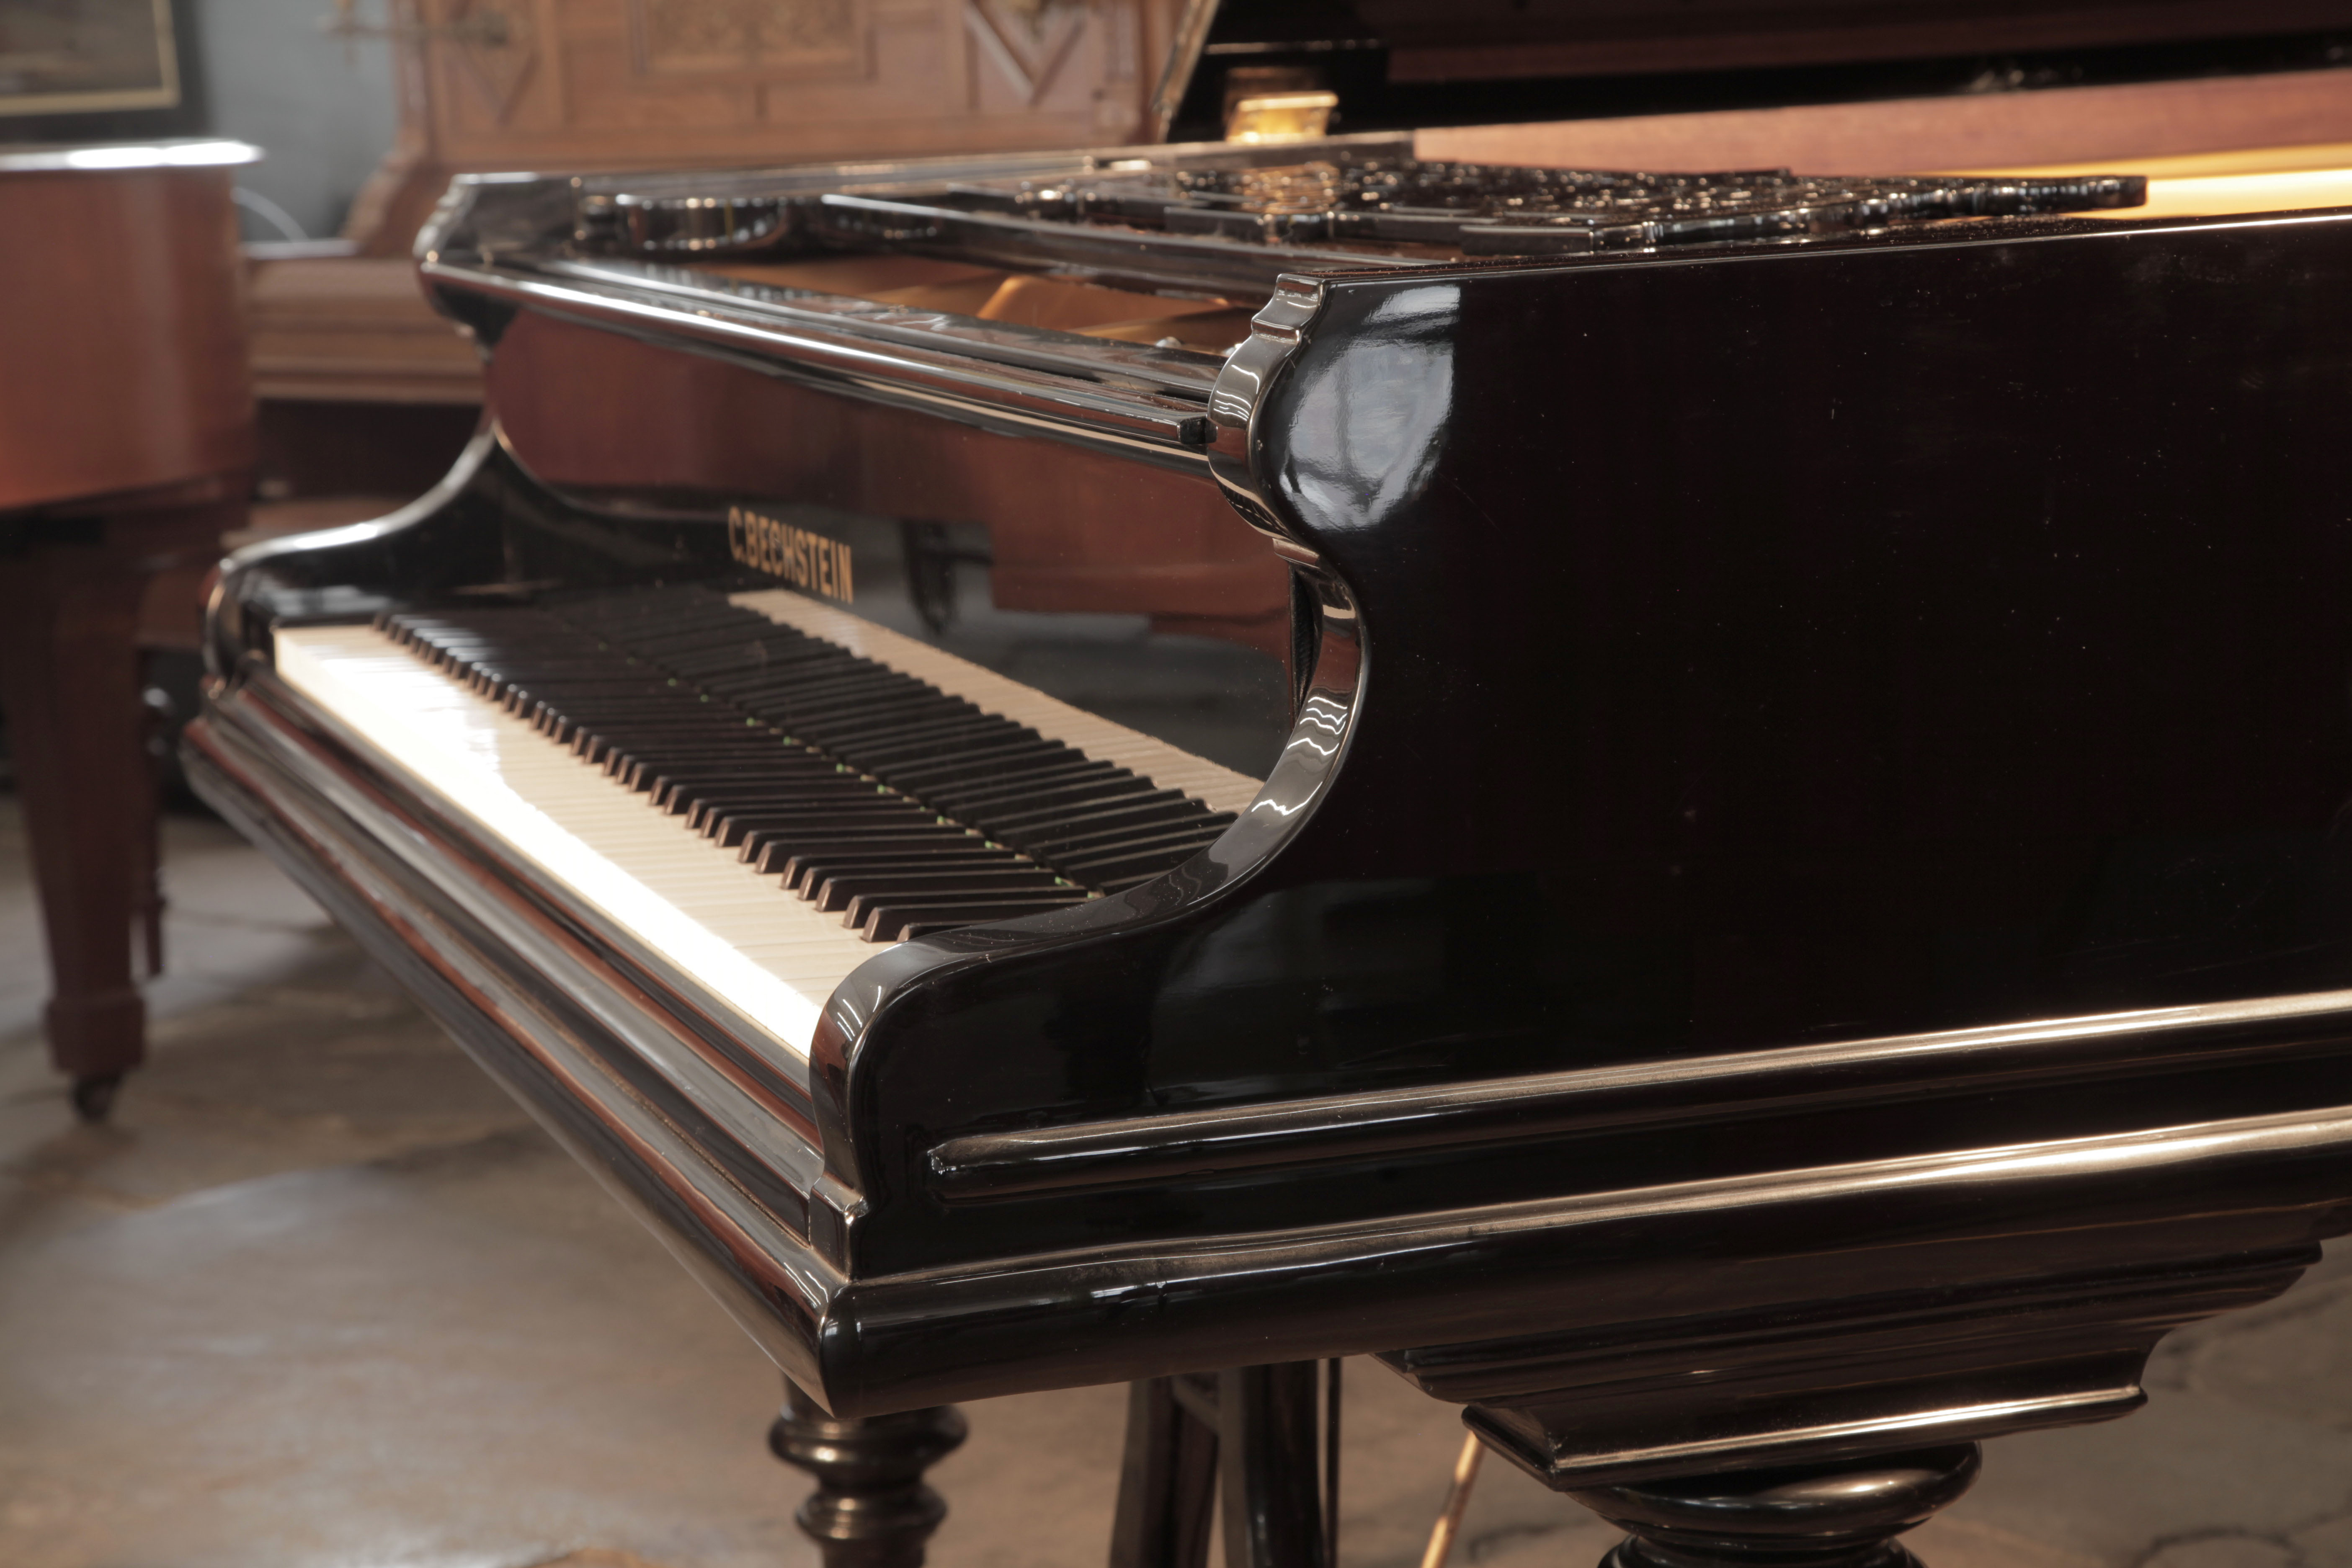 Bechstein Model V rounded piano cheek with linear case moulding that wraps around the cabinet base